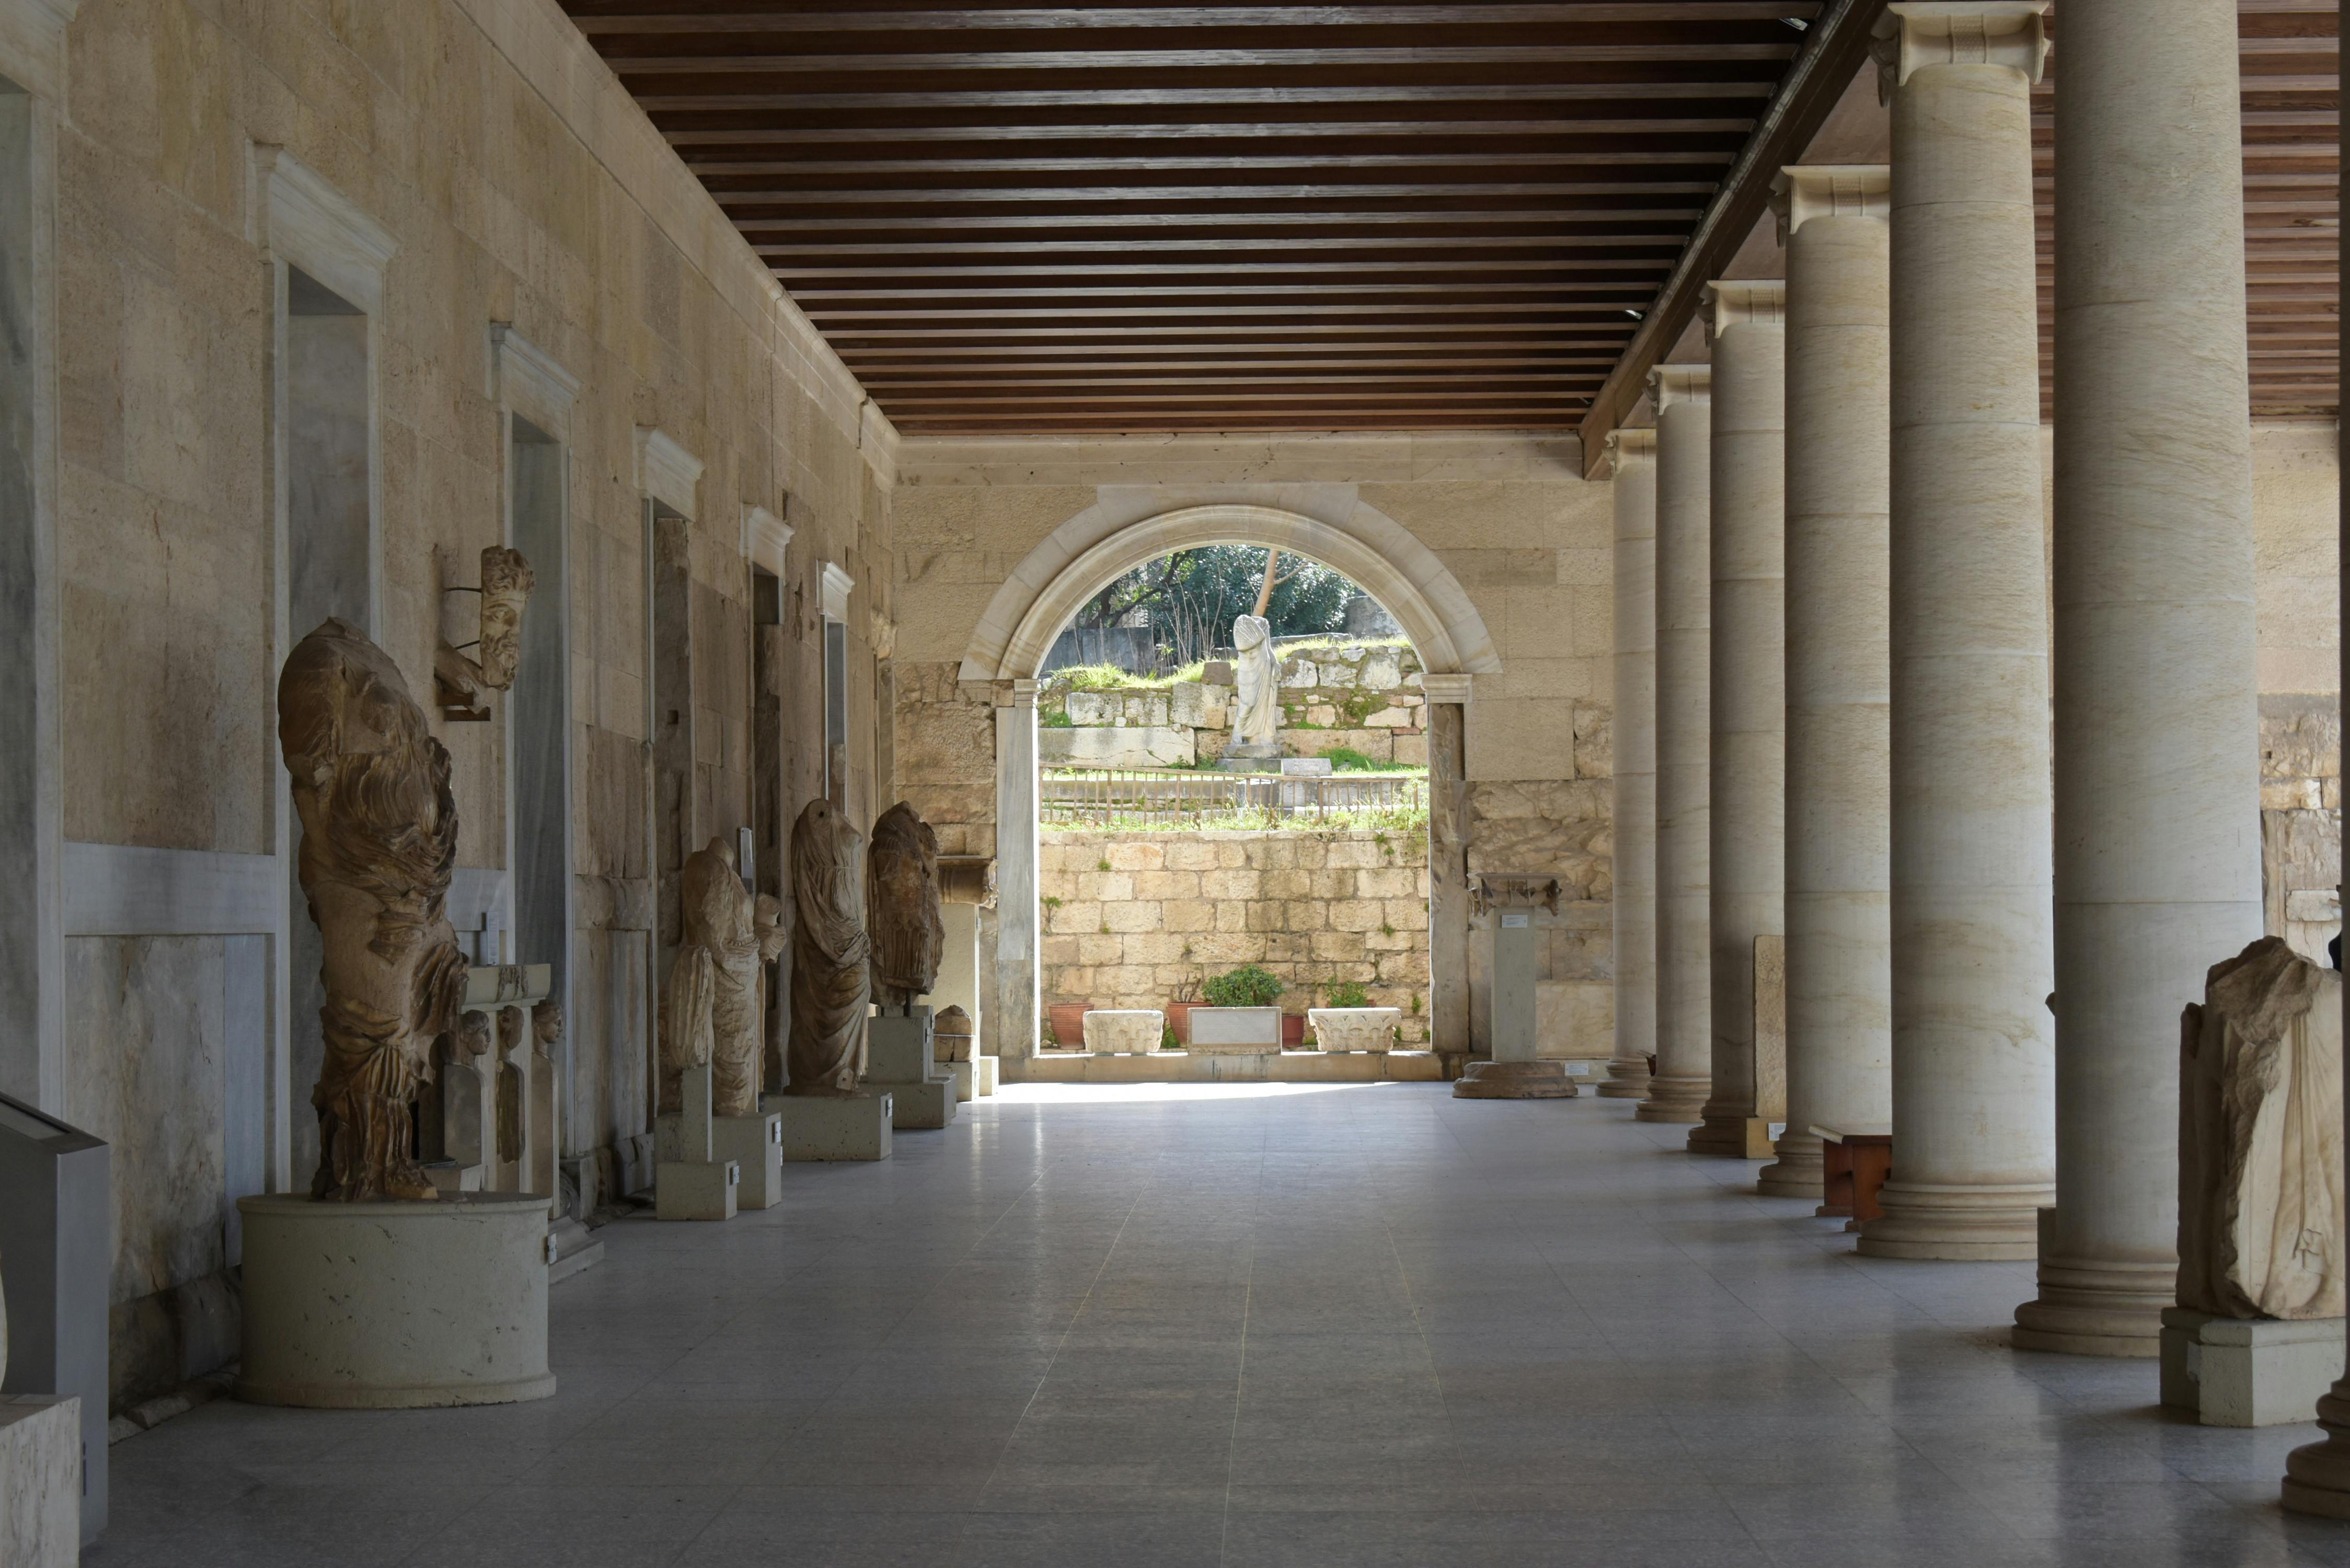 Self guided audio tour of the Ancient Agora Athens Musement